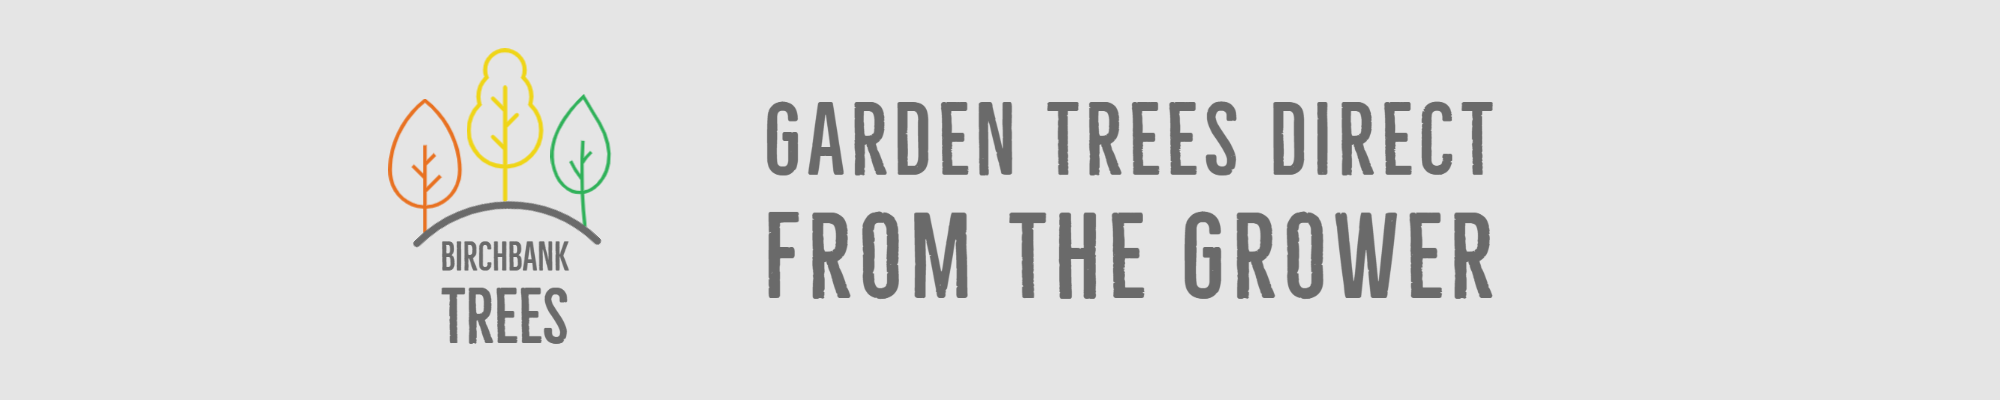 Birchbank trees - direct from the grower